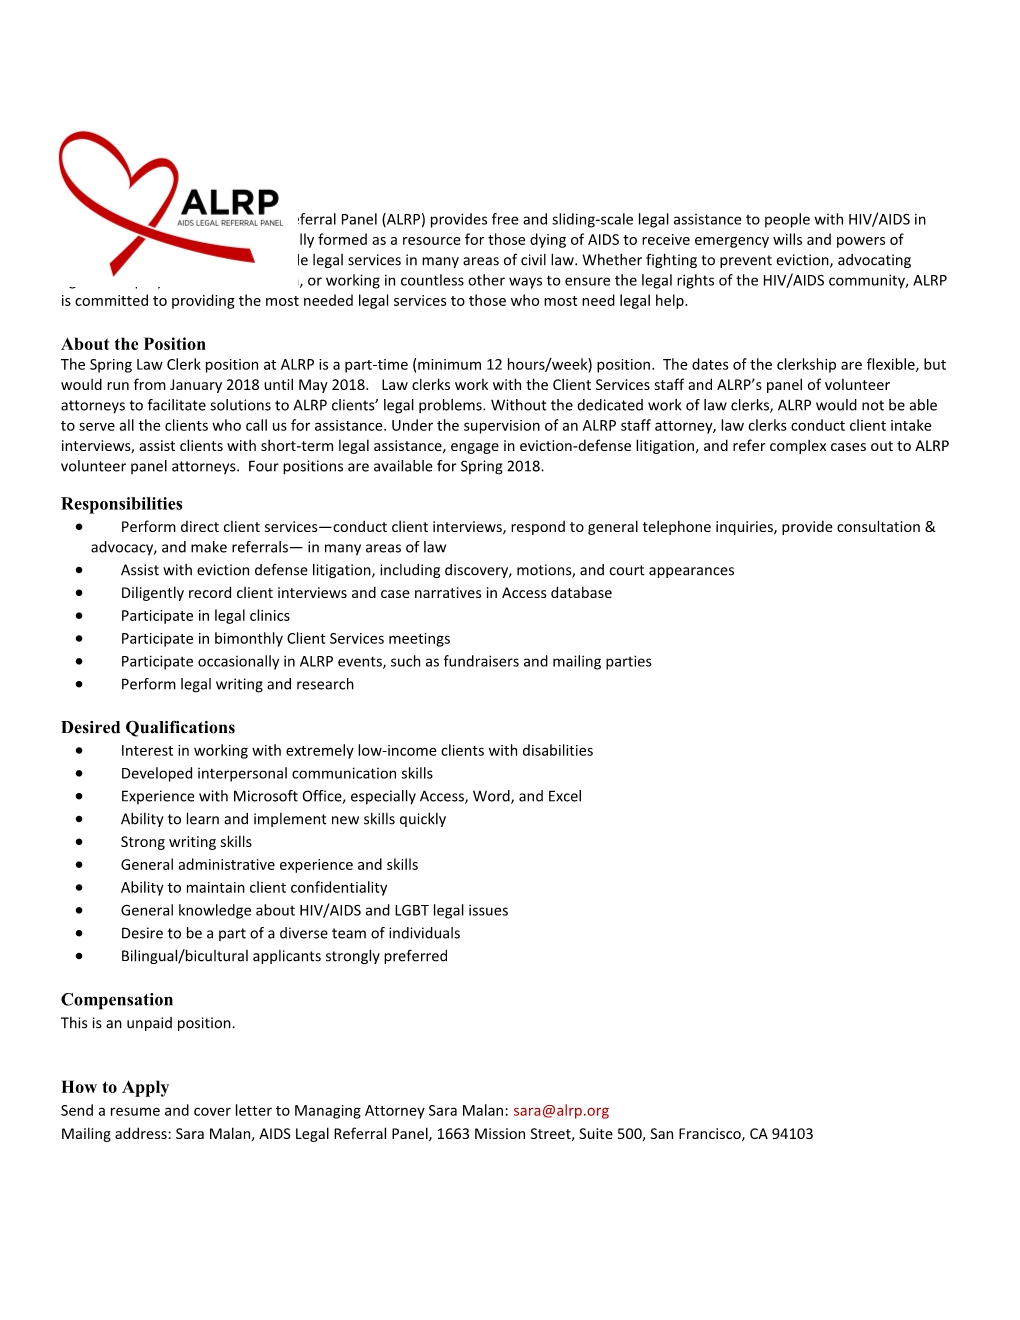 About ALRP Founded in 1983, the AIDS Legal Referral Panel (ALRP) Provides Free and Sliding-Scale